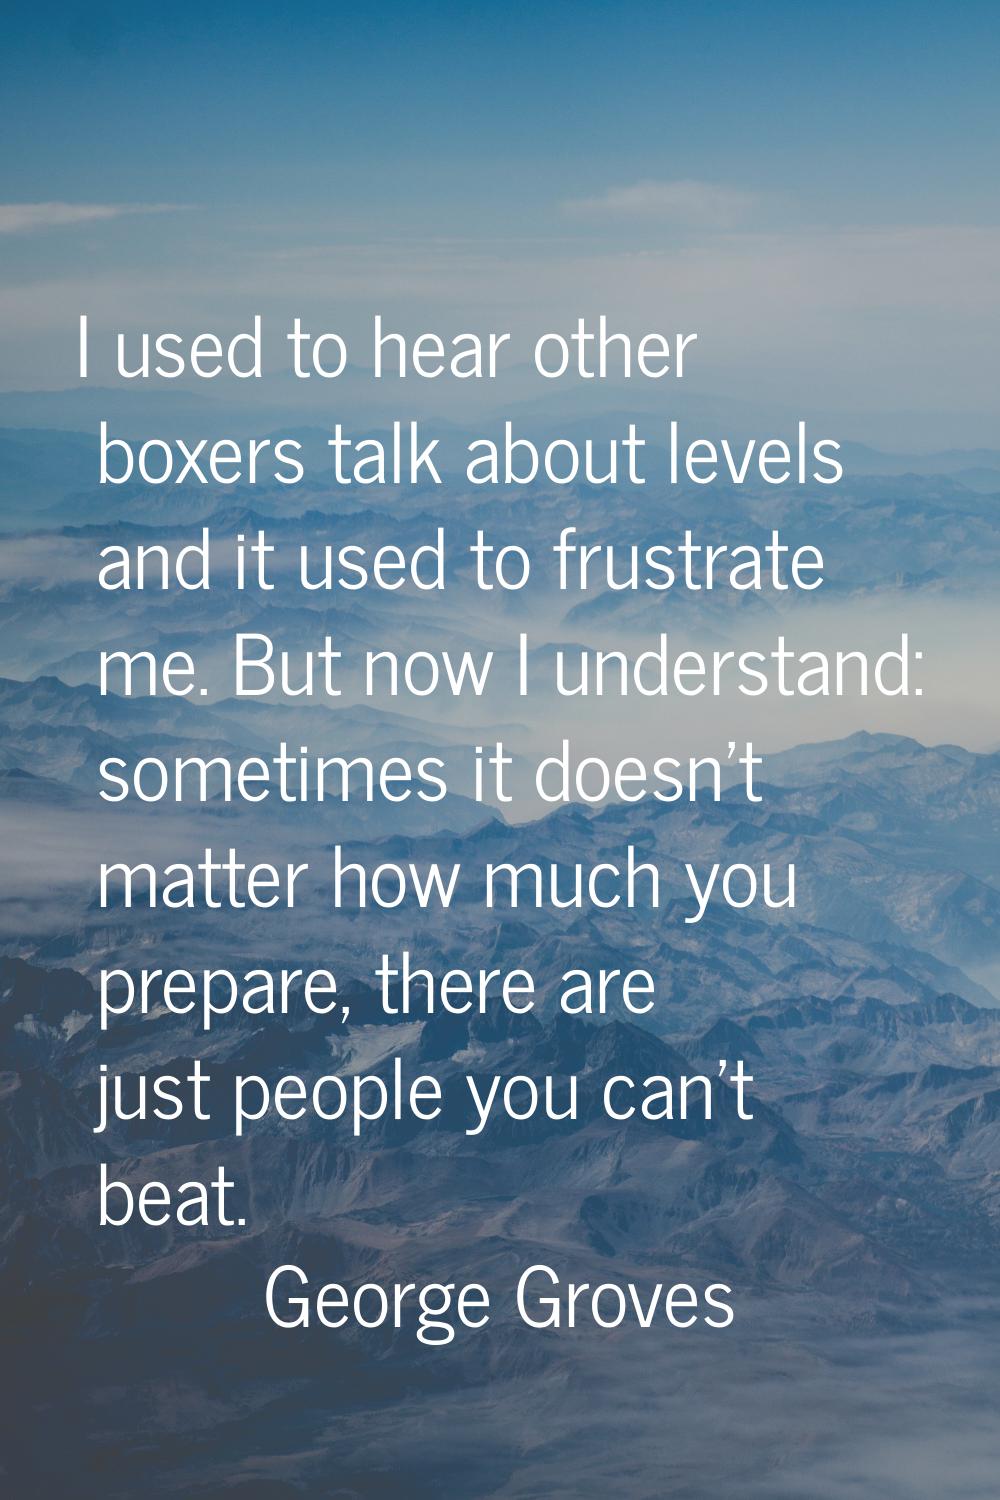 I used to hear other boxers talk about levels and it used to frustrate me. But now I understand: so